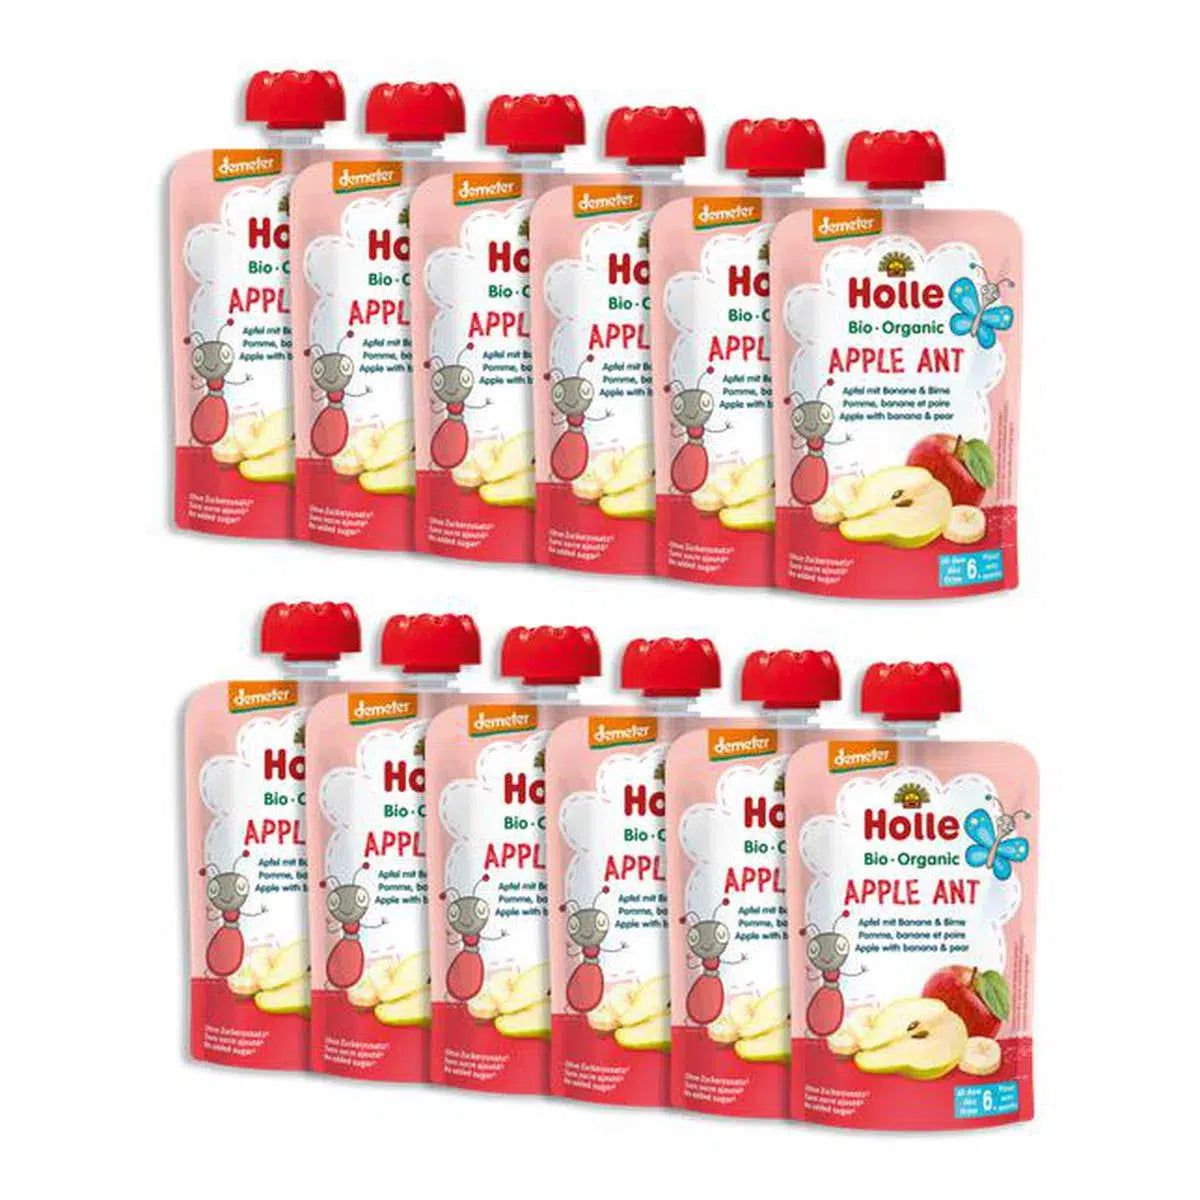 Holle Apple Ant: Apple, Banana & Pear (6+ months) - 12 Pouches